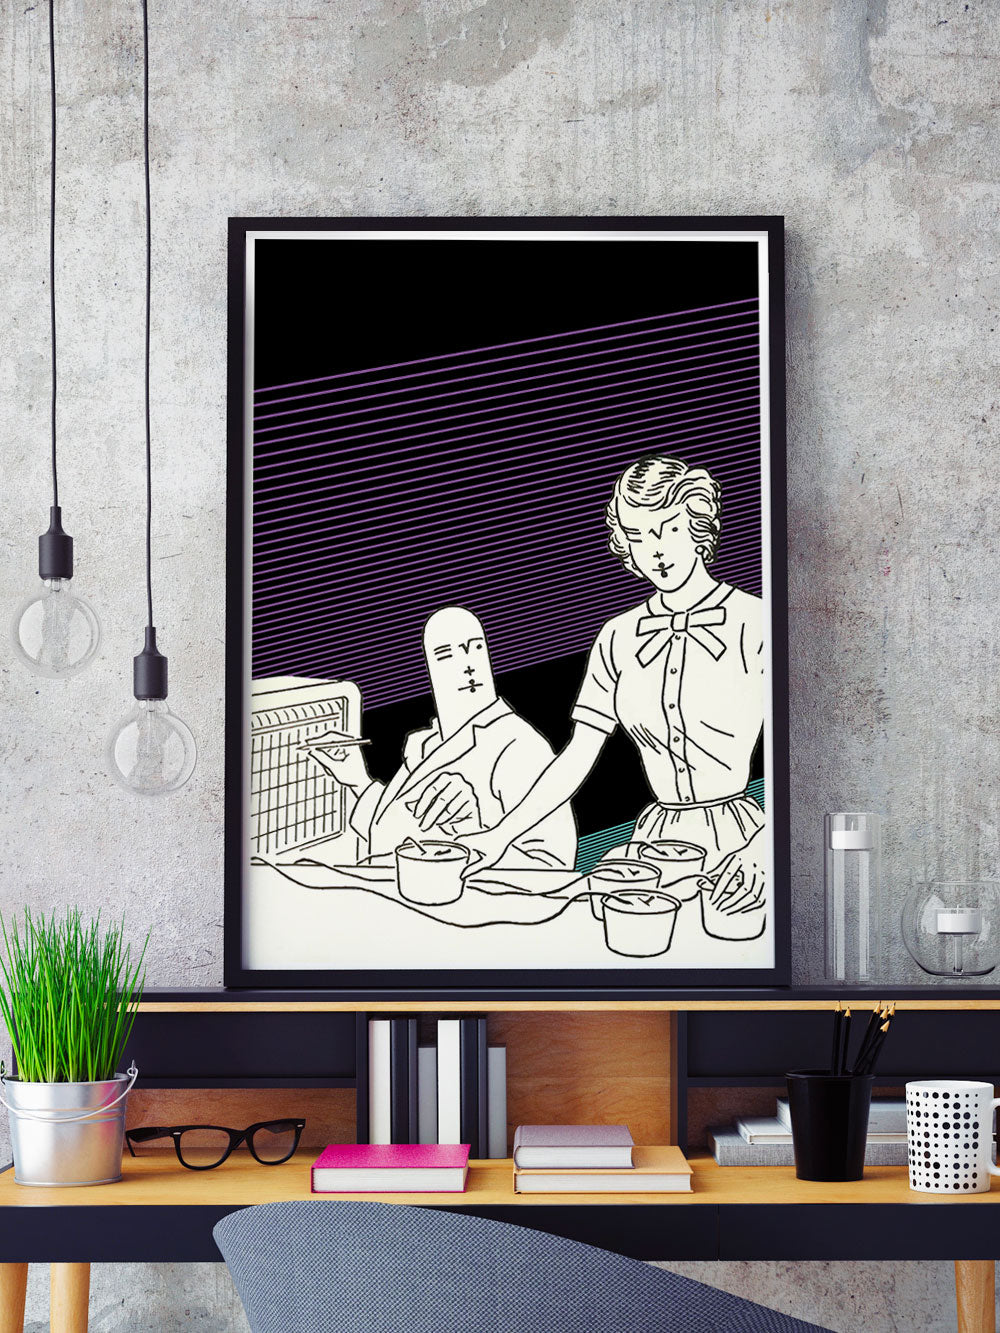 Linear Frequency Illustration Print in a frame on a shelf